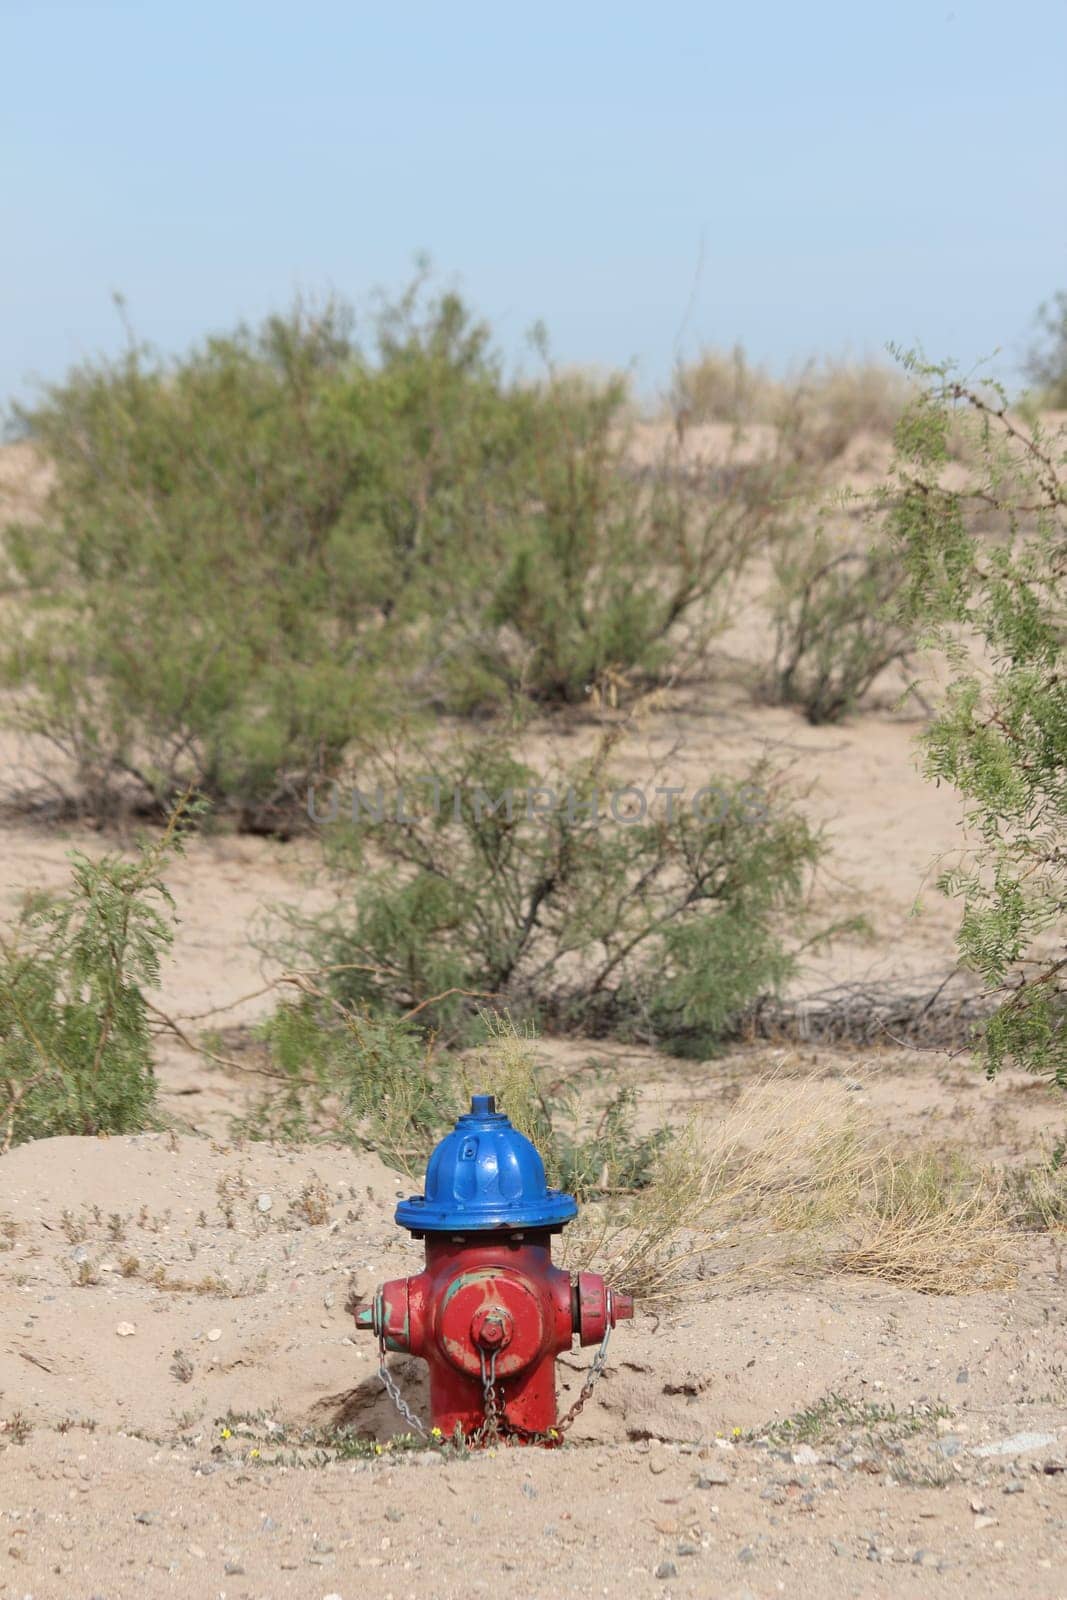 Red and blue fire hydrant in a desert landscape environment